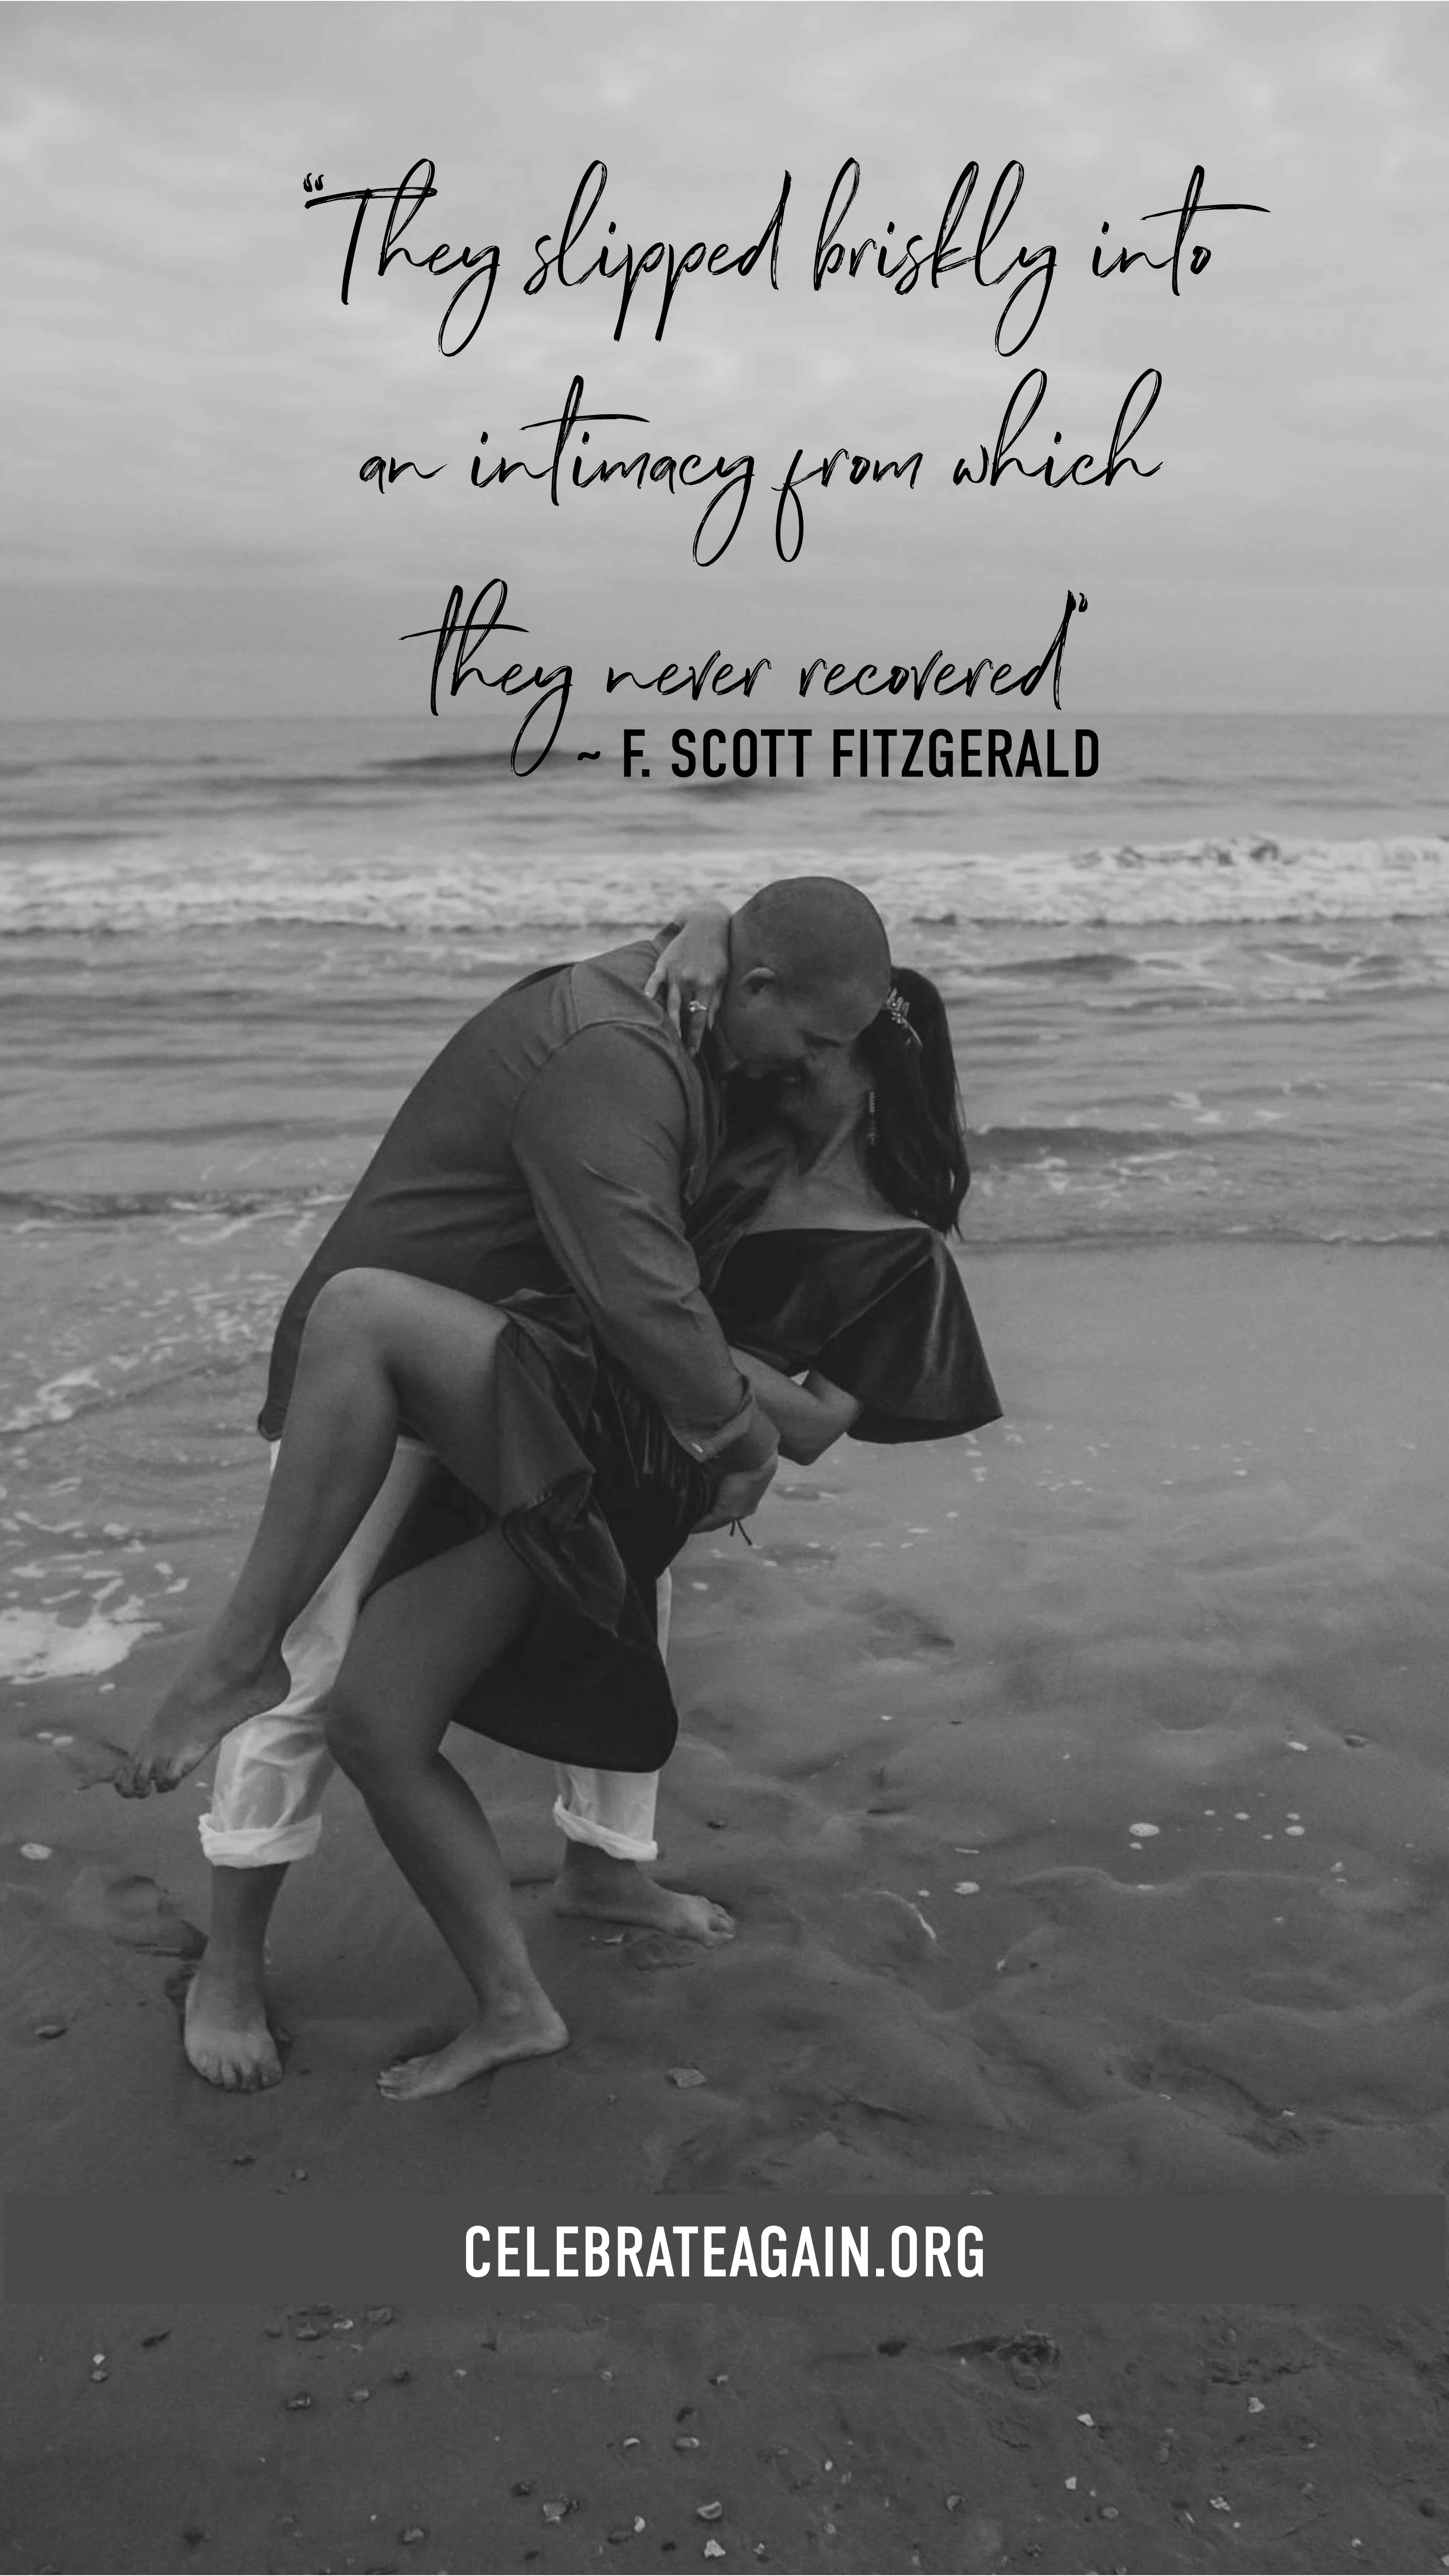 “They slipped briskly into an intimacy from which they never recovered” F. Scott Fitzgerald couple kissing on a beach by celebrateagain.org